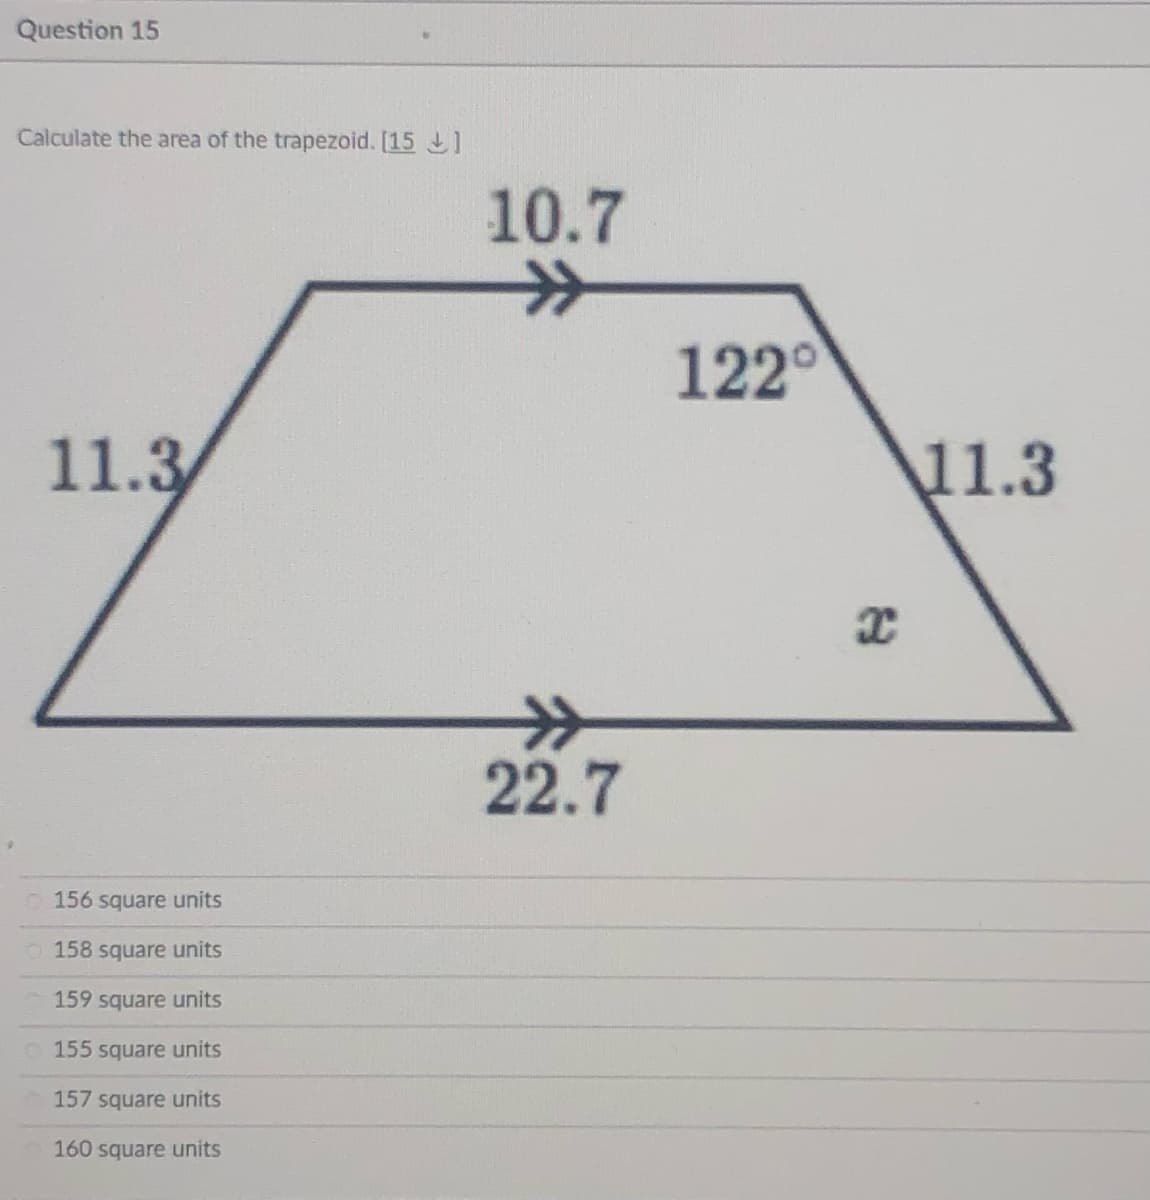 Question 15
Calculate the area of the trapezoid. [15 ]
10.7
122°
11.3
\11.3
>>
22.7
156 square units
158 square units
159 square units
155 square units
157 square units
160 square units
